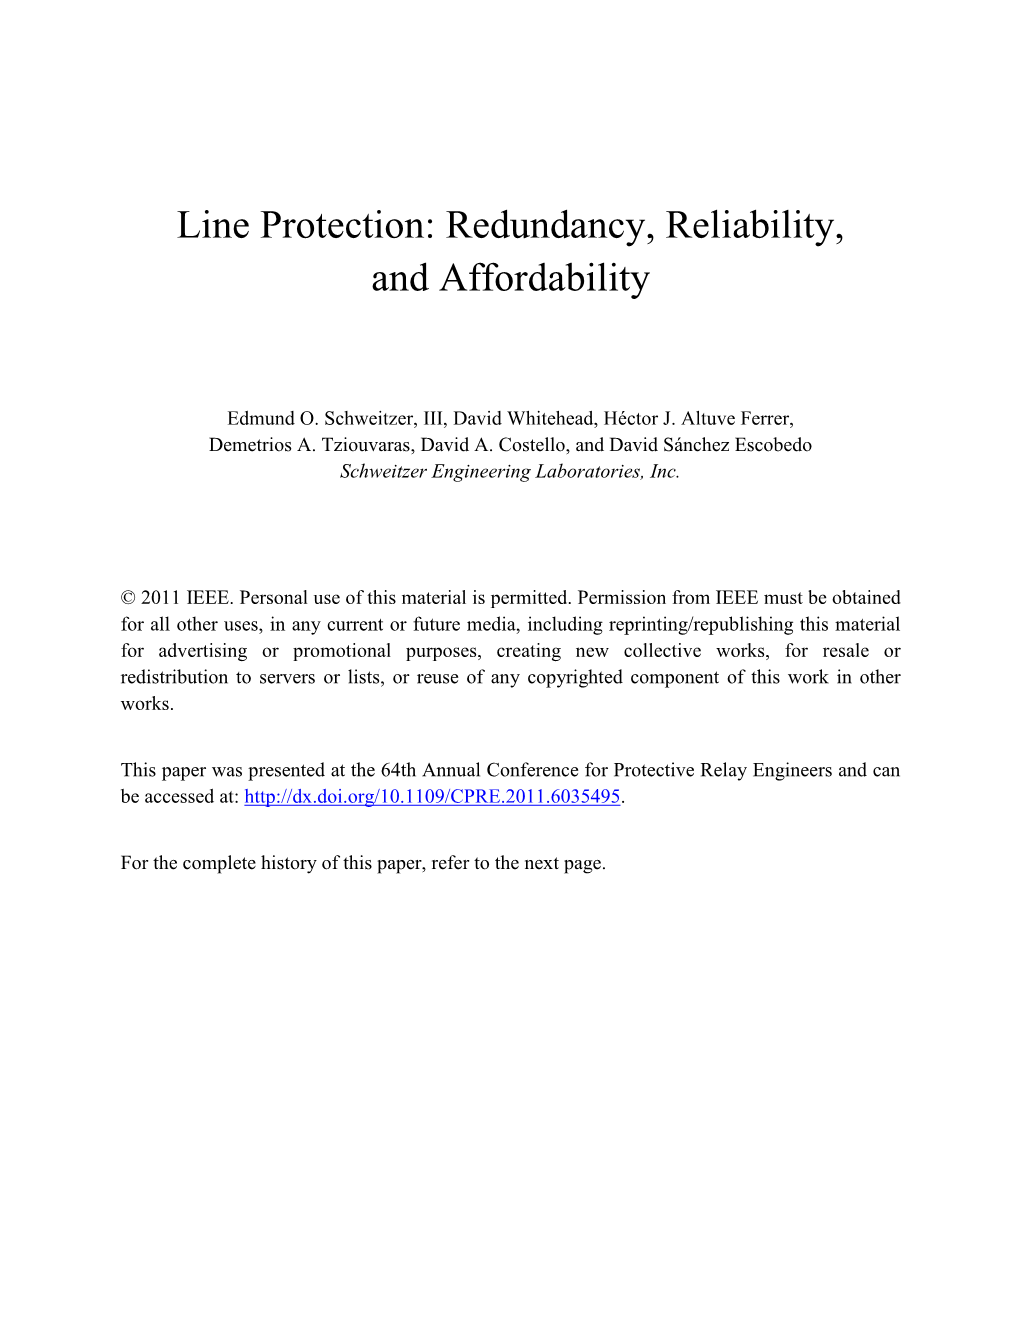 Line Protection: Redundancy, Reliability, and Affordability